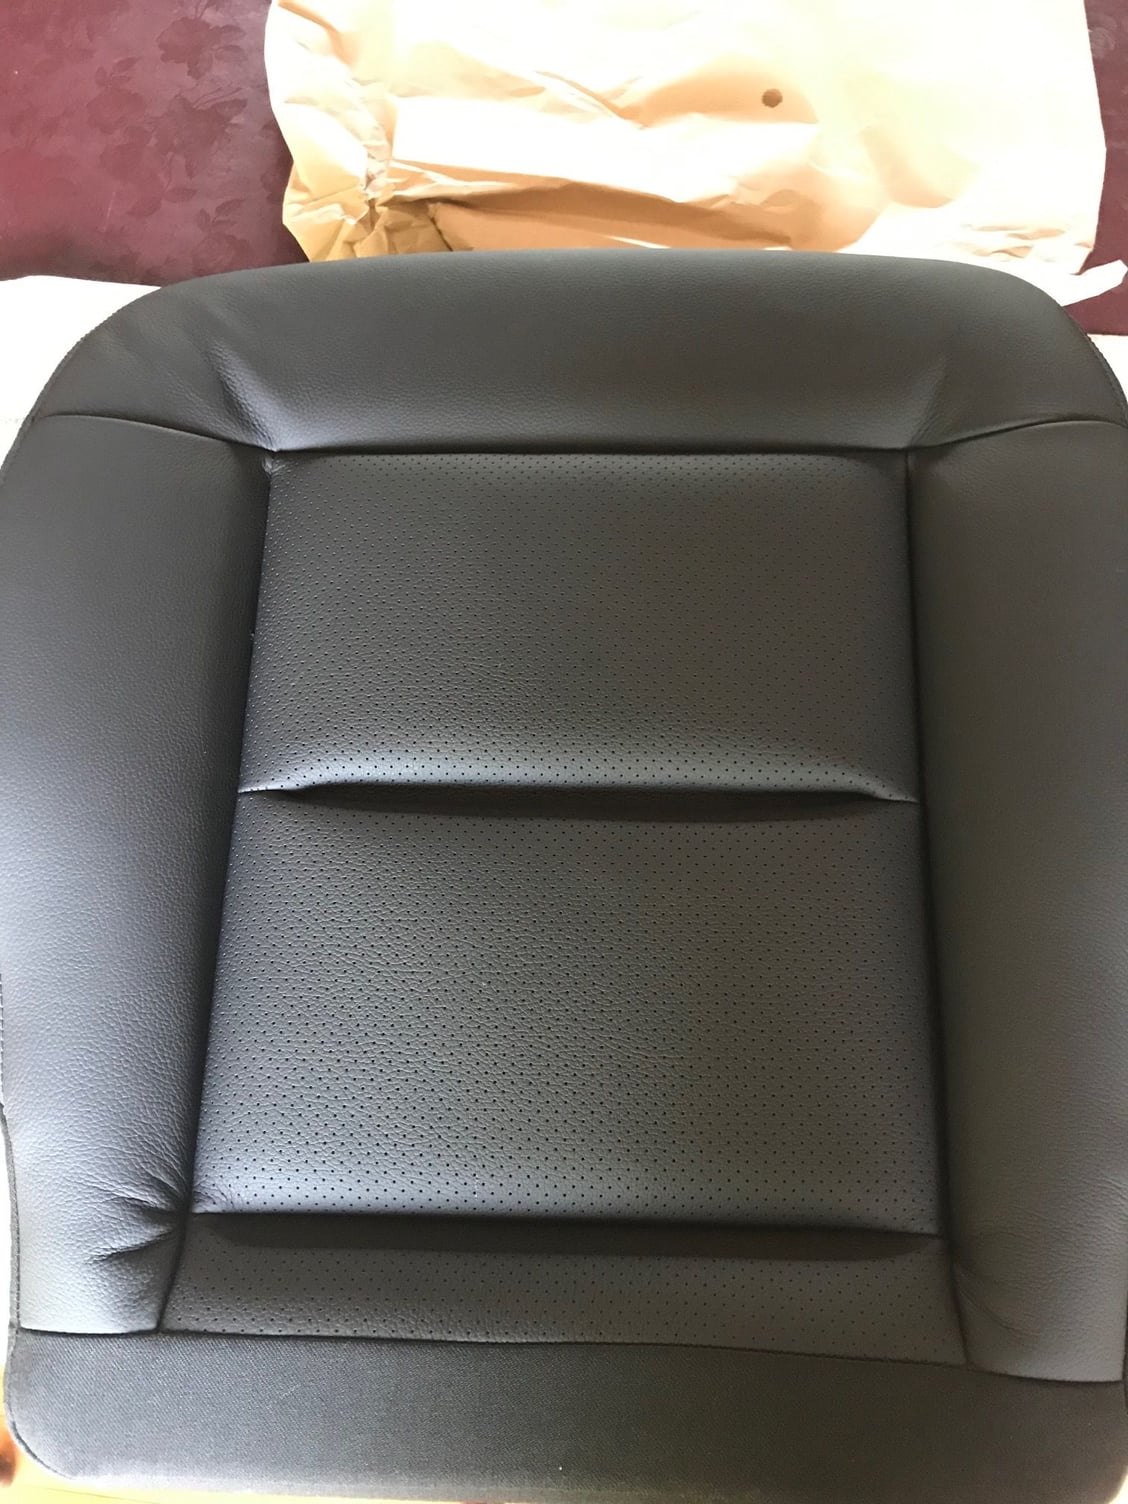 Where to buy new leather seat cover for bottom driver, and heater